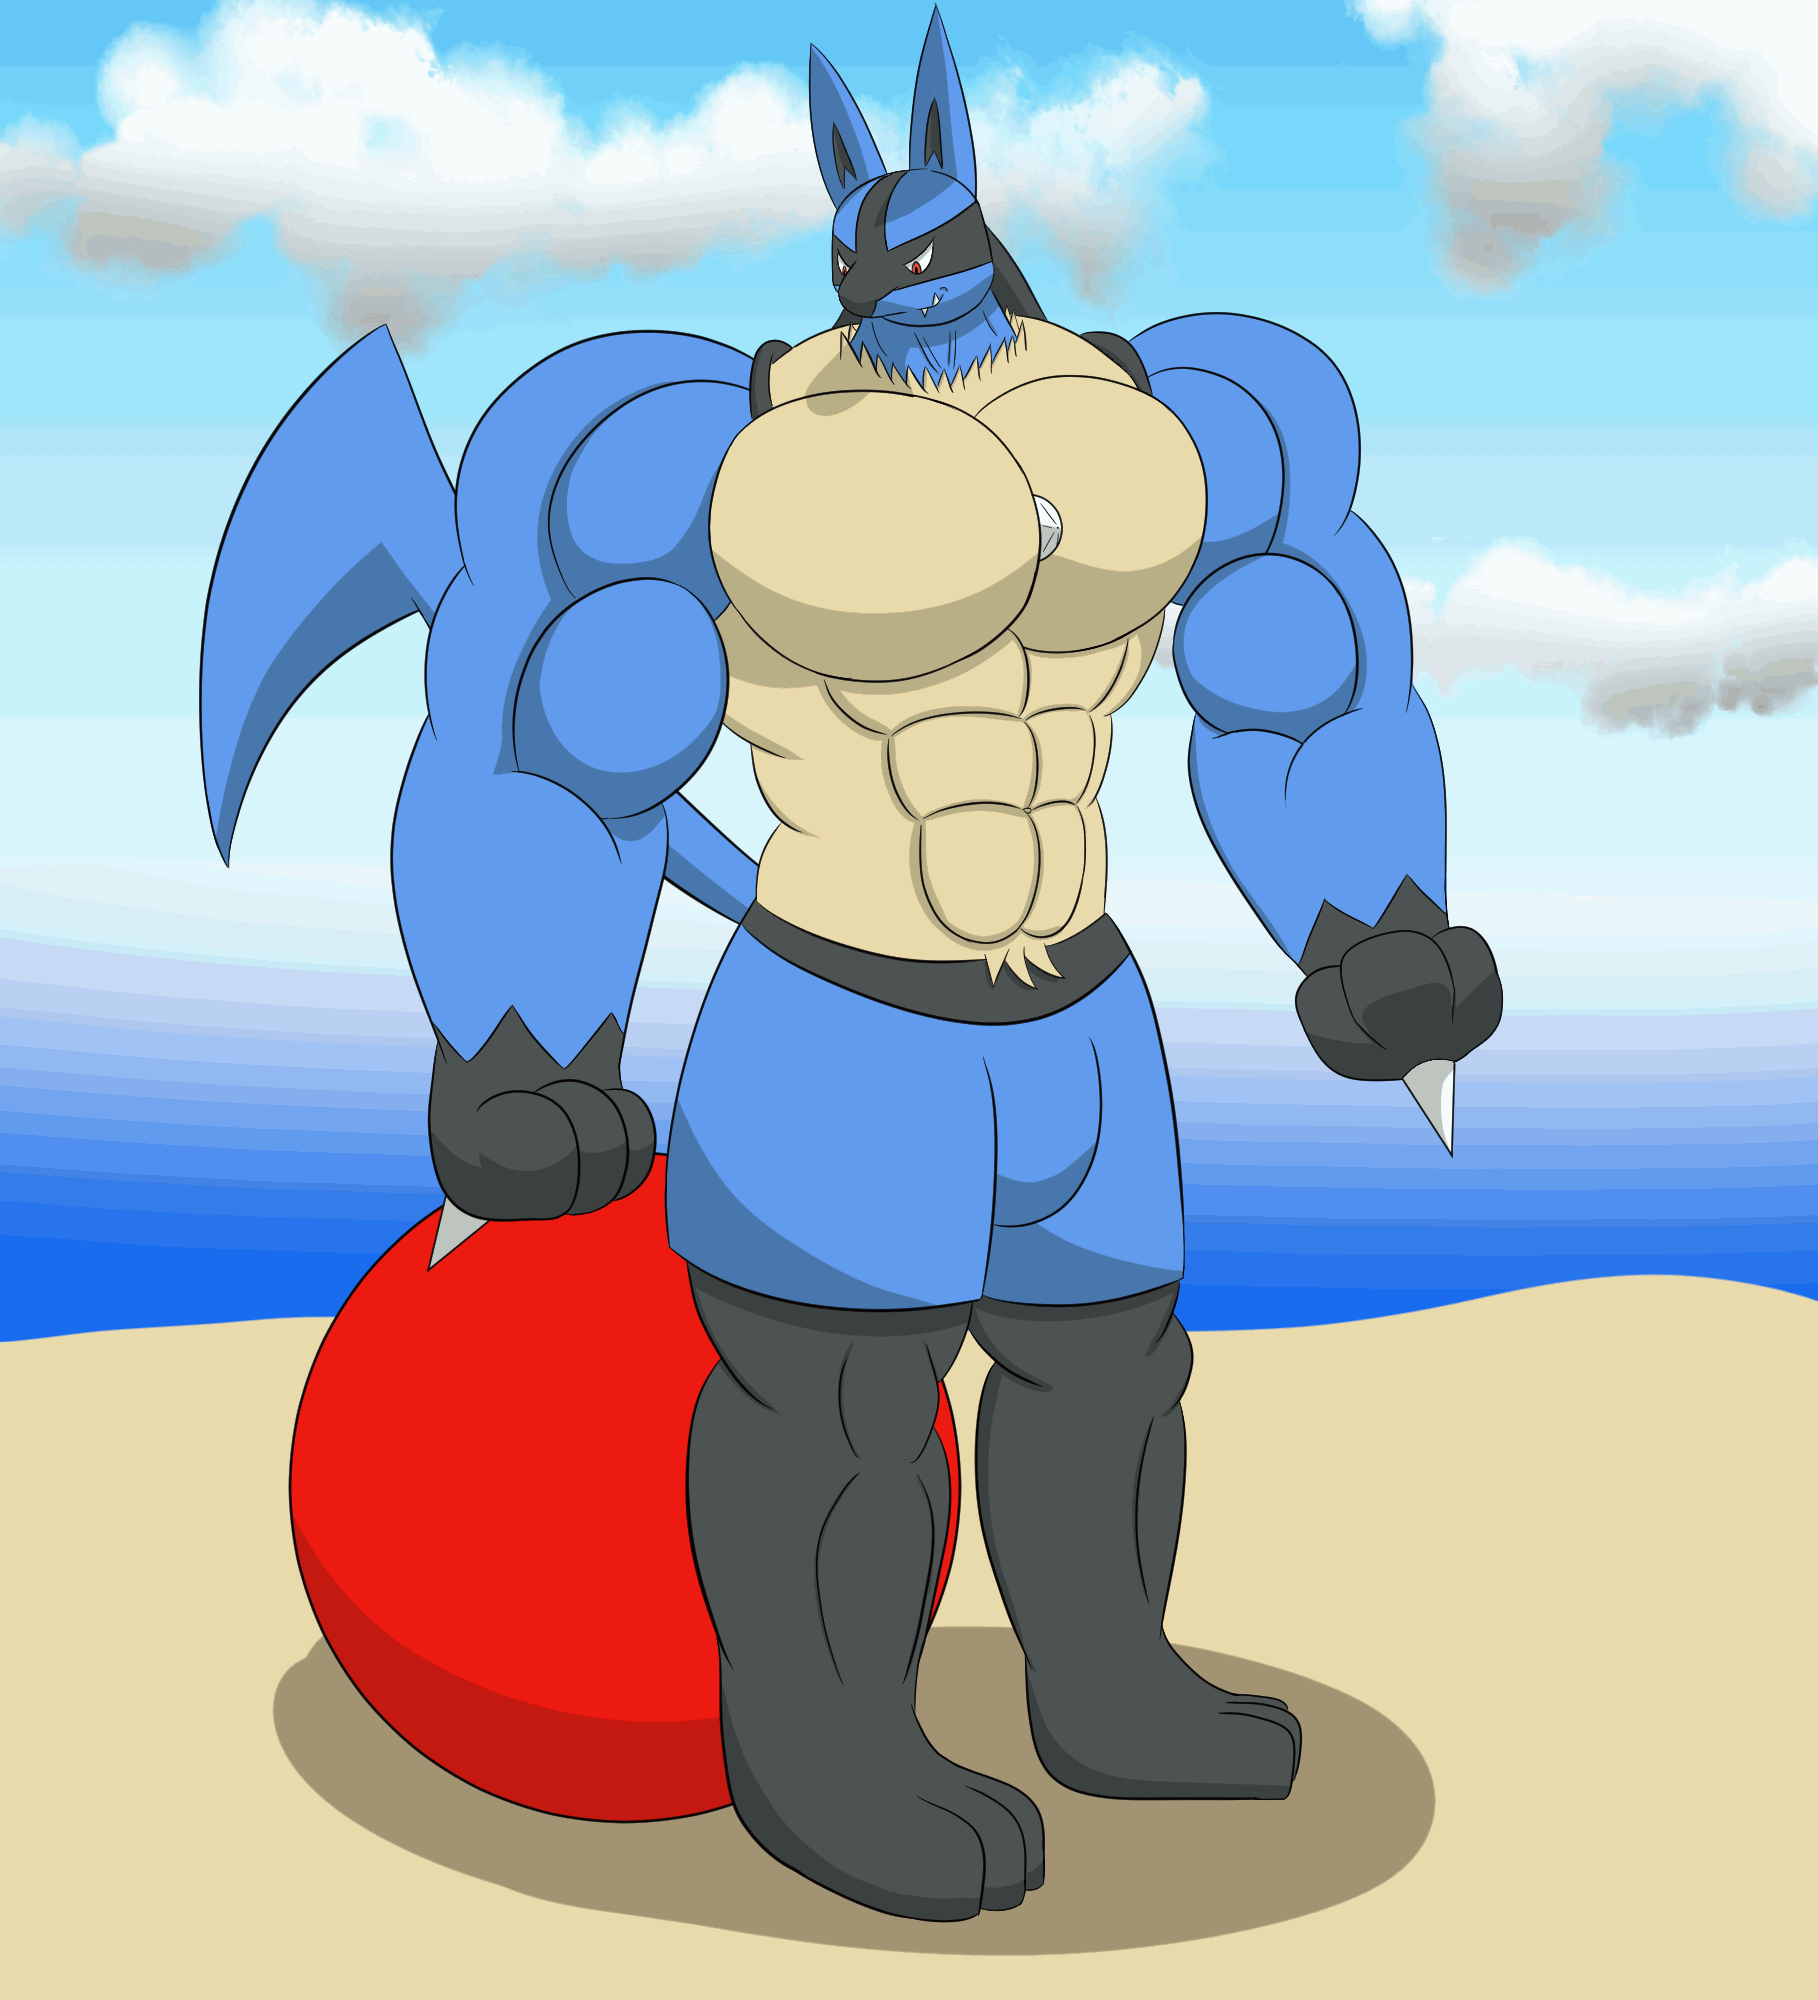 Лукарио muscle growth. Lucario muscle growth giant. Покемон muscleartguy muscle growth. Лукарио бицепс muscle. Dick expansion